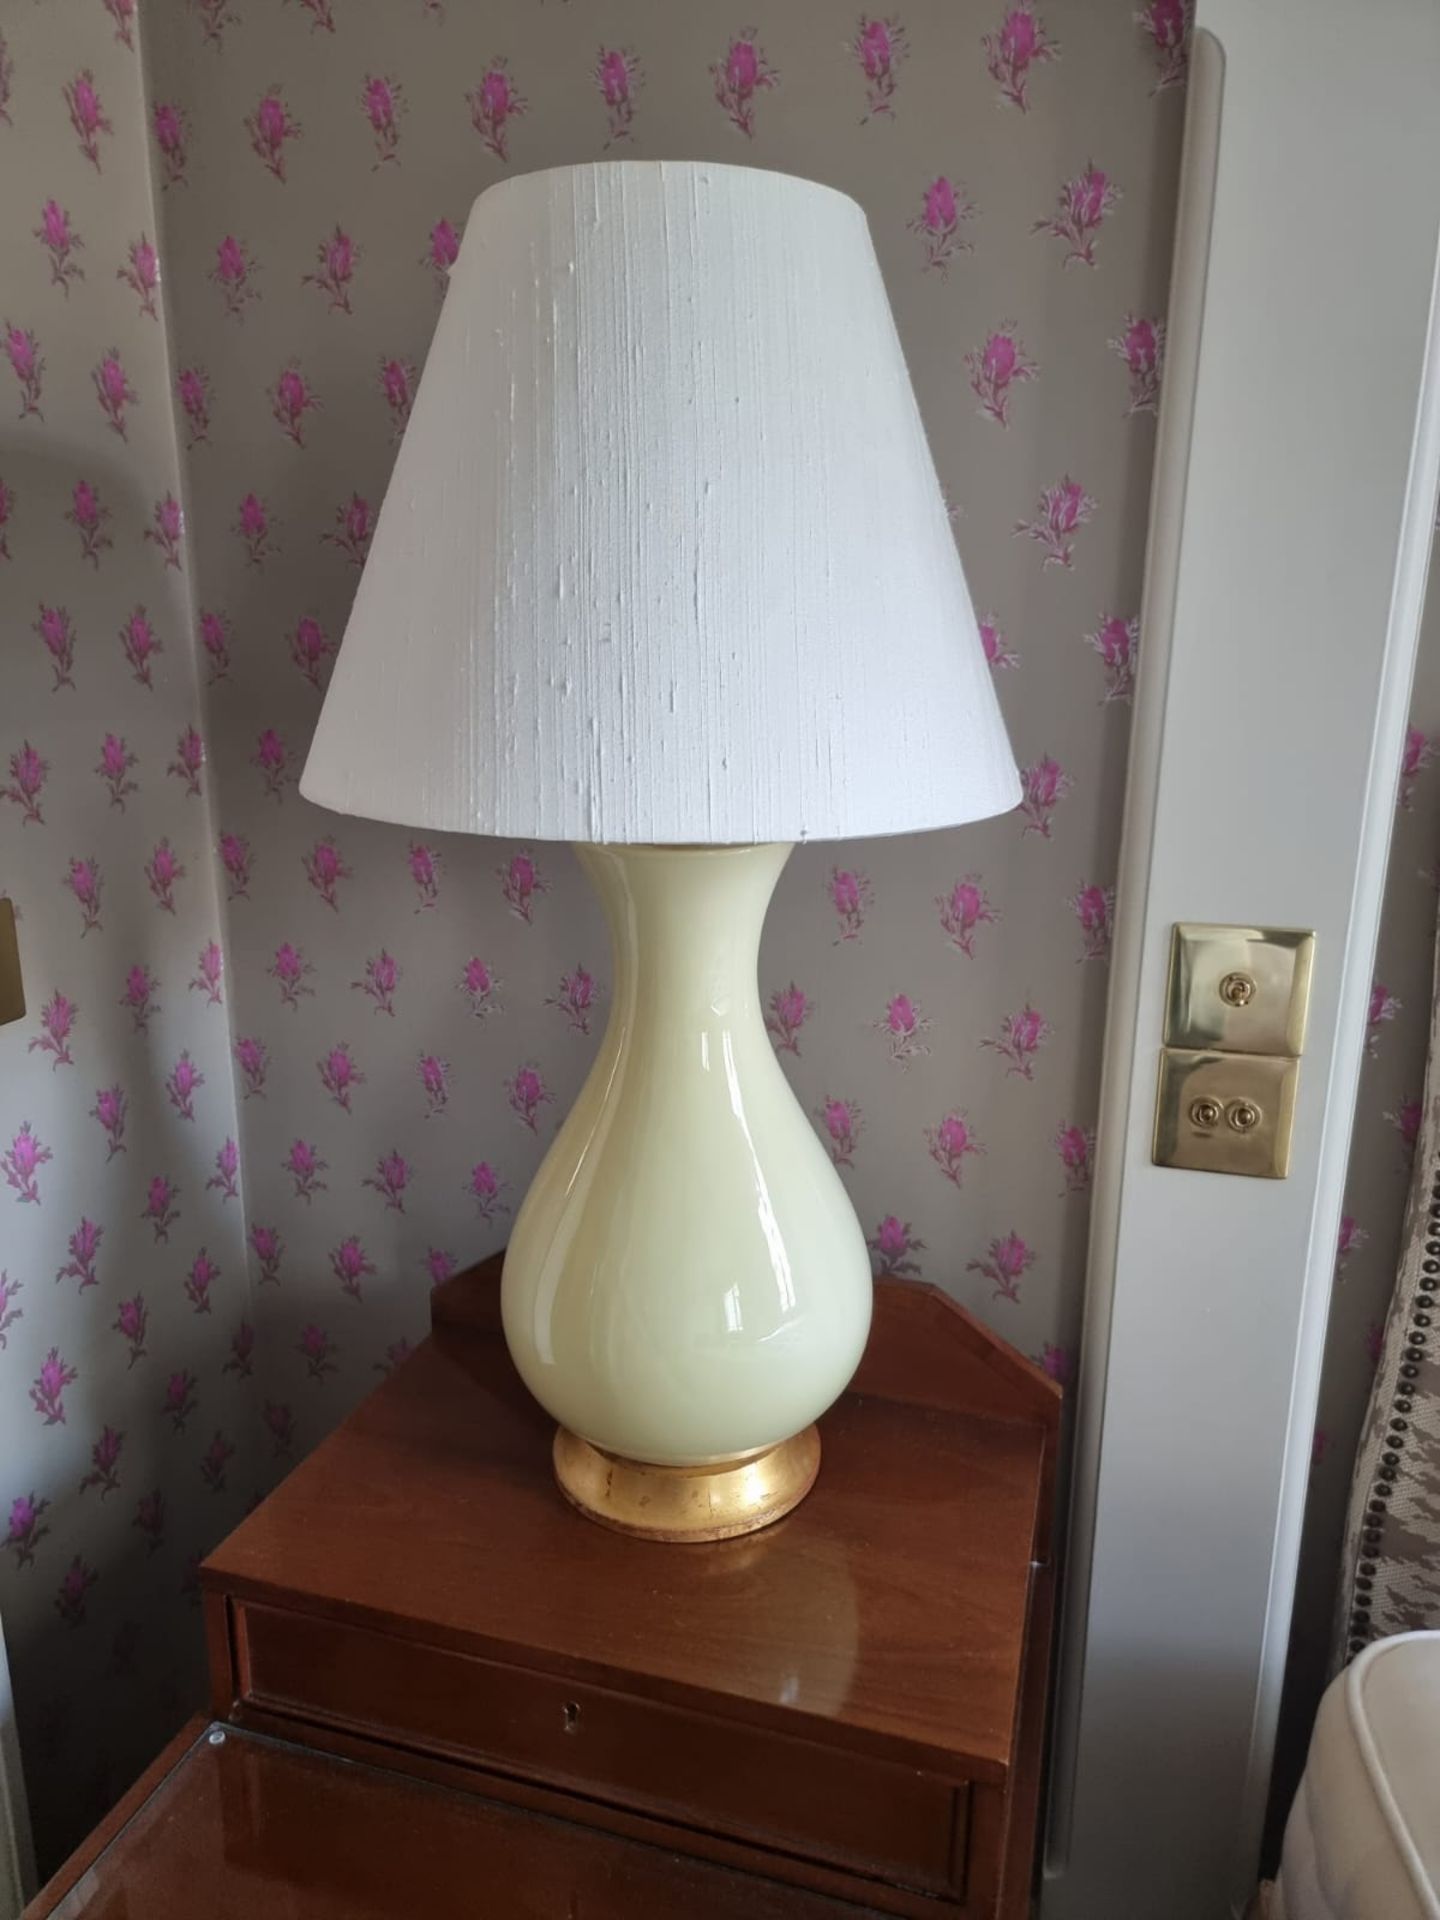 A Pair Of Heathfield And Co Louisa Glazed Ceramic Table Lamp With Textured Shade 77cm Room 608